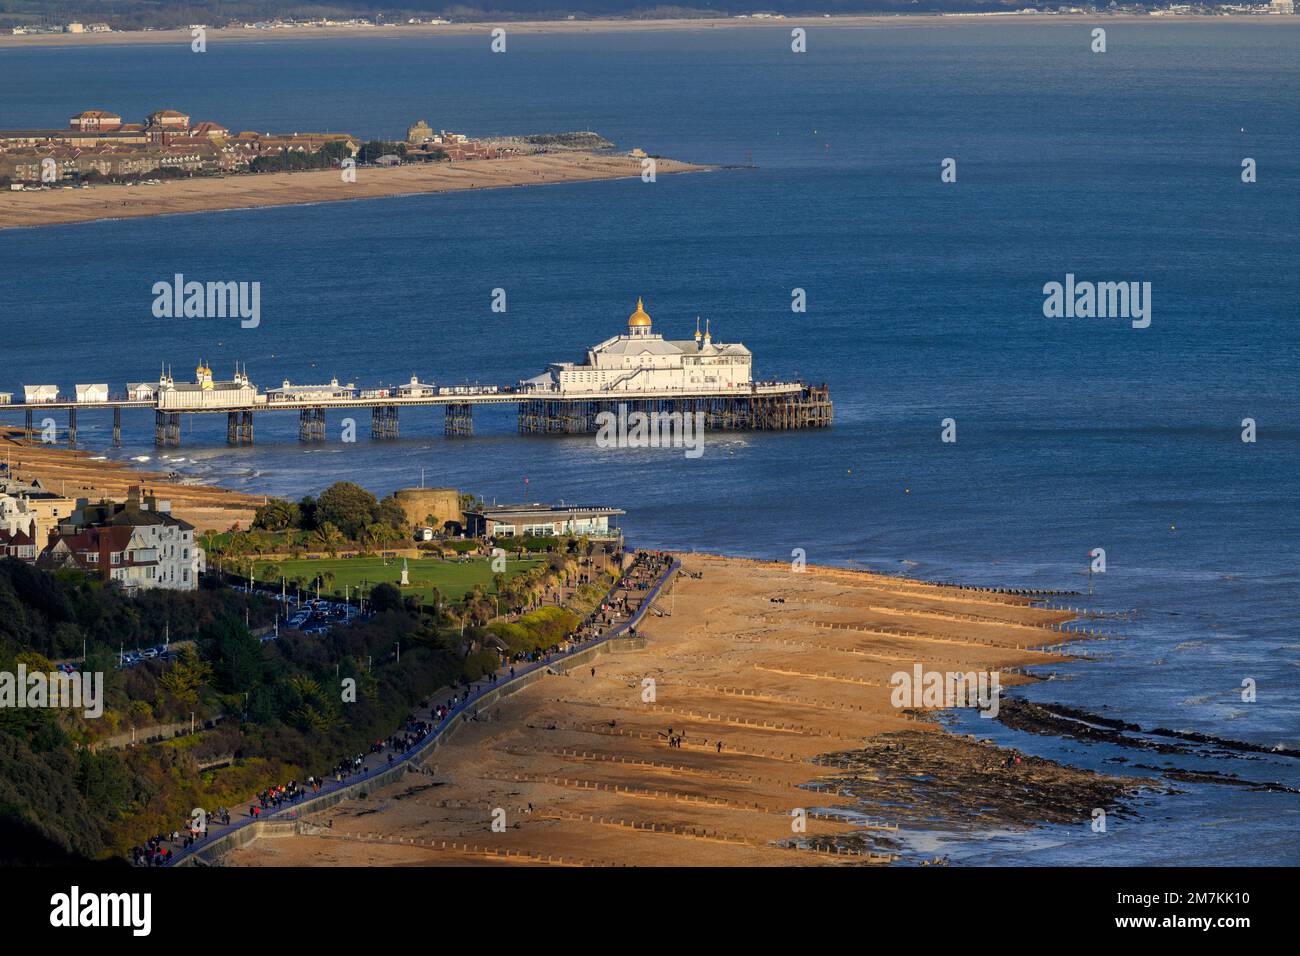 Distant view of Eastbourne Pier with the gold-topped camera obscura roof detail - viewed from Beachy Head looking East. Stock Photo